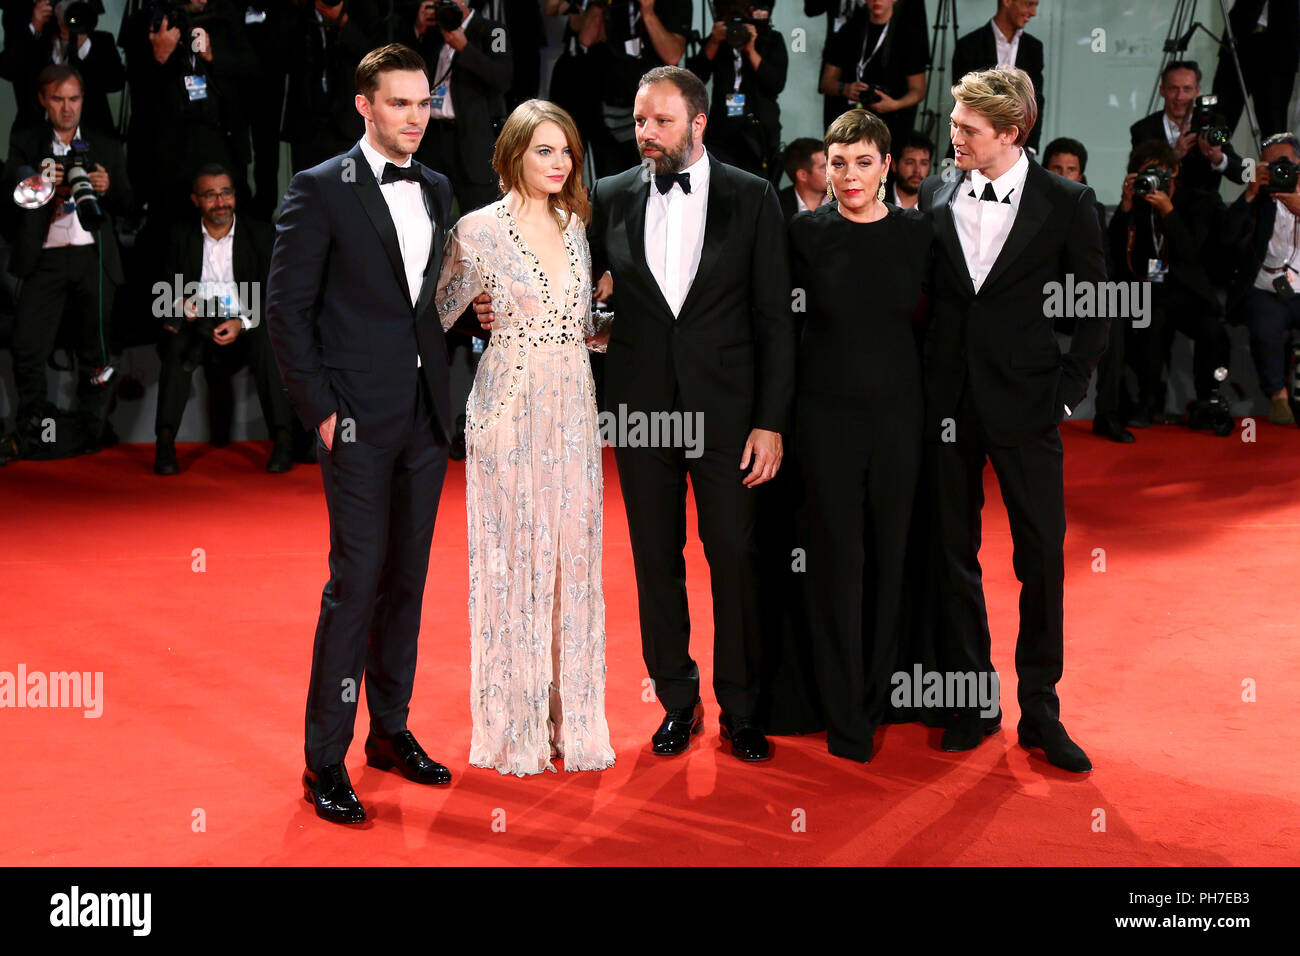 Venice, Italy. 30th Aug 2018. (L-R) Nicholas Hoult, Emma Stone, Yorgos Lanthimos, Olivia Colman and Joe Alwyn attend the 'The Favorite' première on August 30, 2018 in Venice, Italy.(By Mark Cape/Insidefoto) Credit: insidefoto srl/Alamy Live News Stock Photo